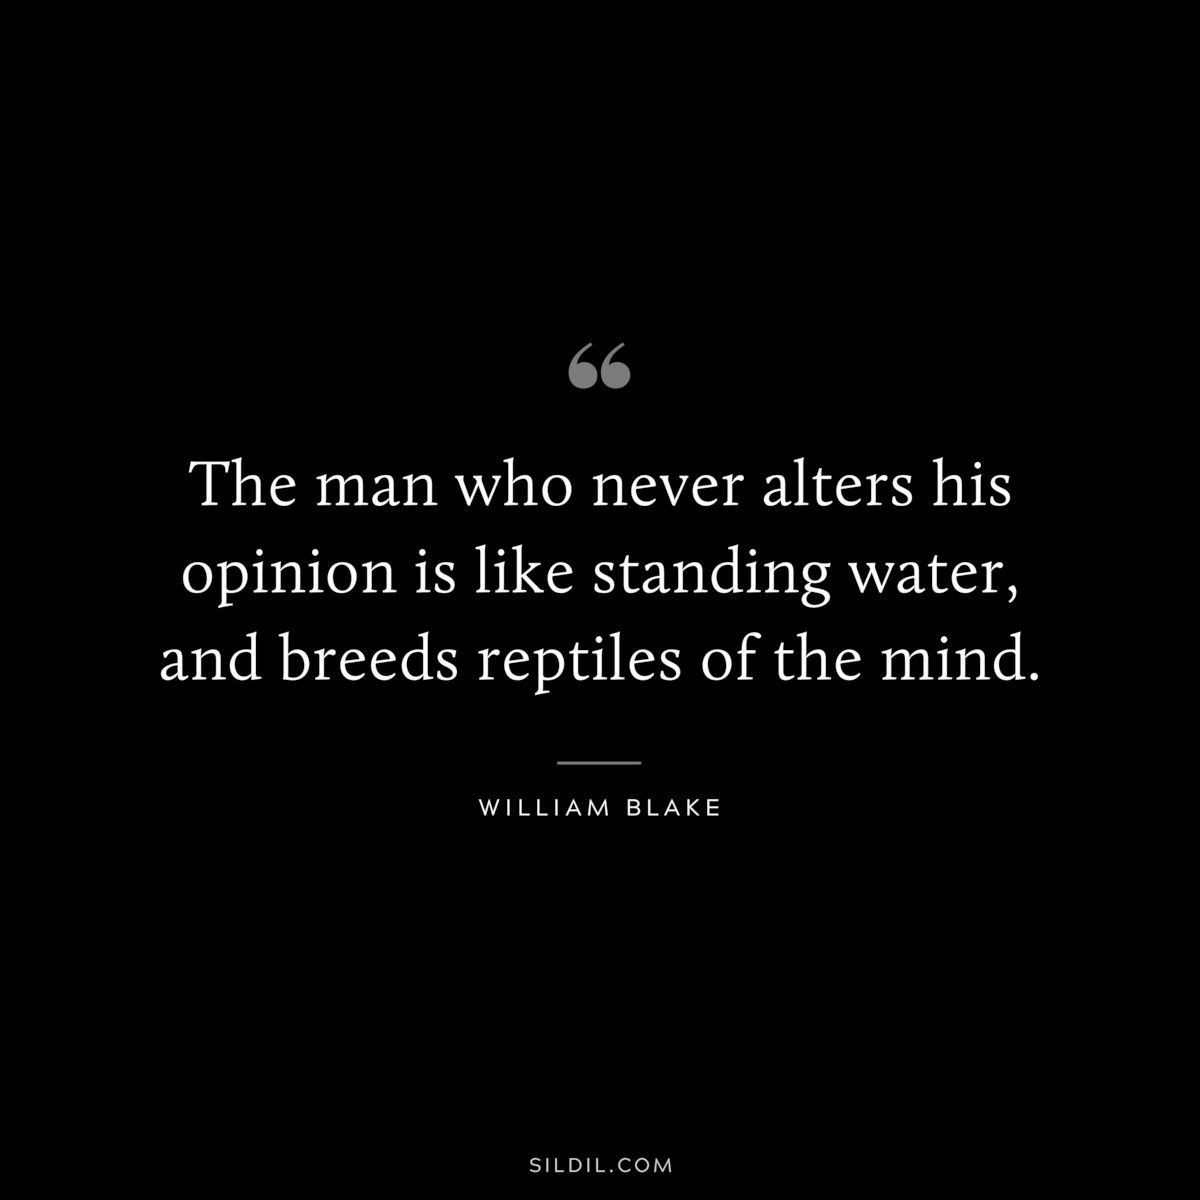 The man who never alters his opinion is like standing water, and breeds reptiles of the mind. ― William Blake